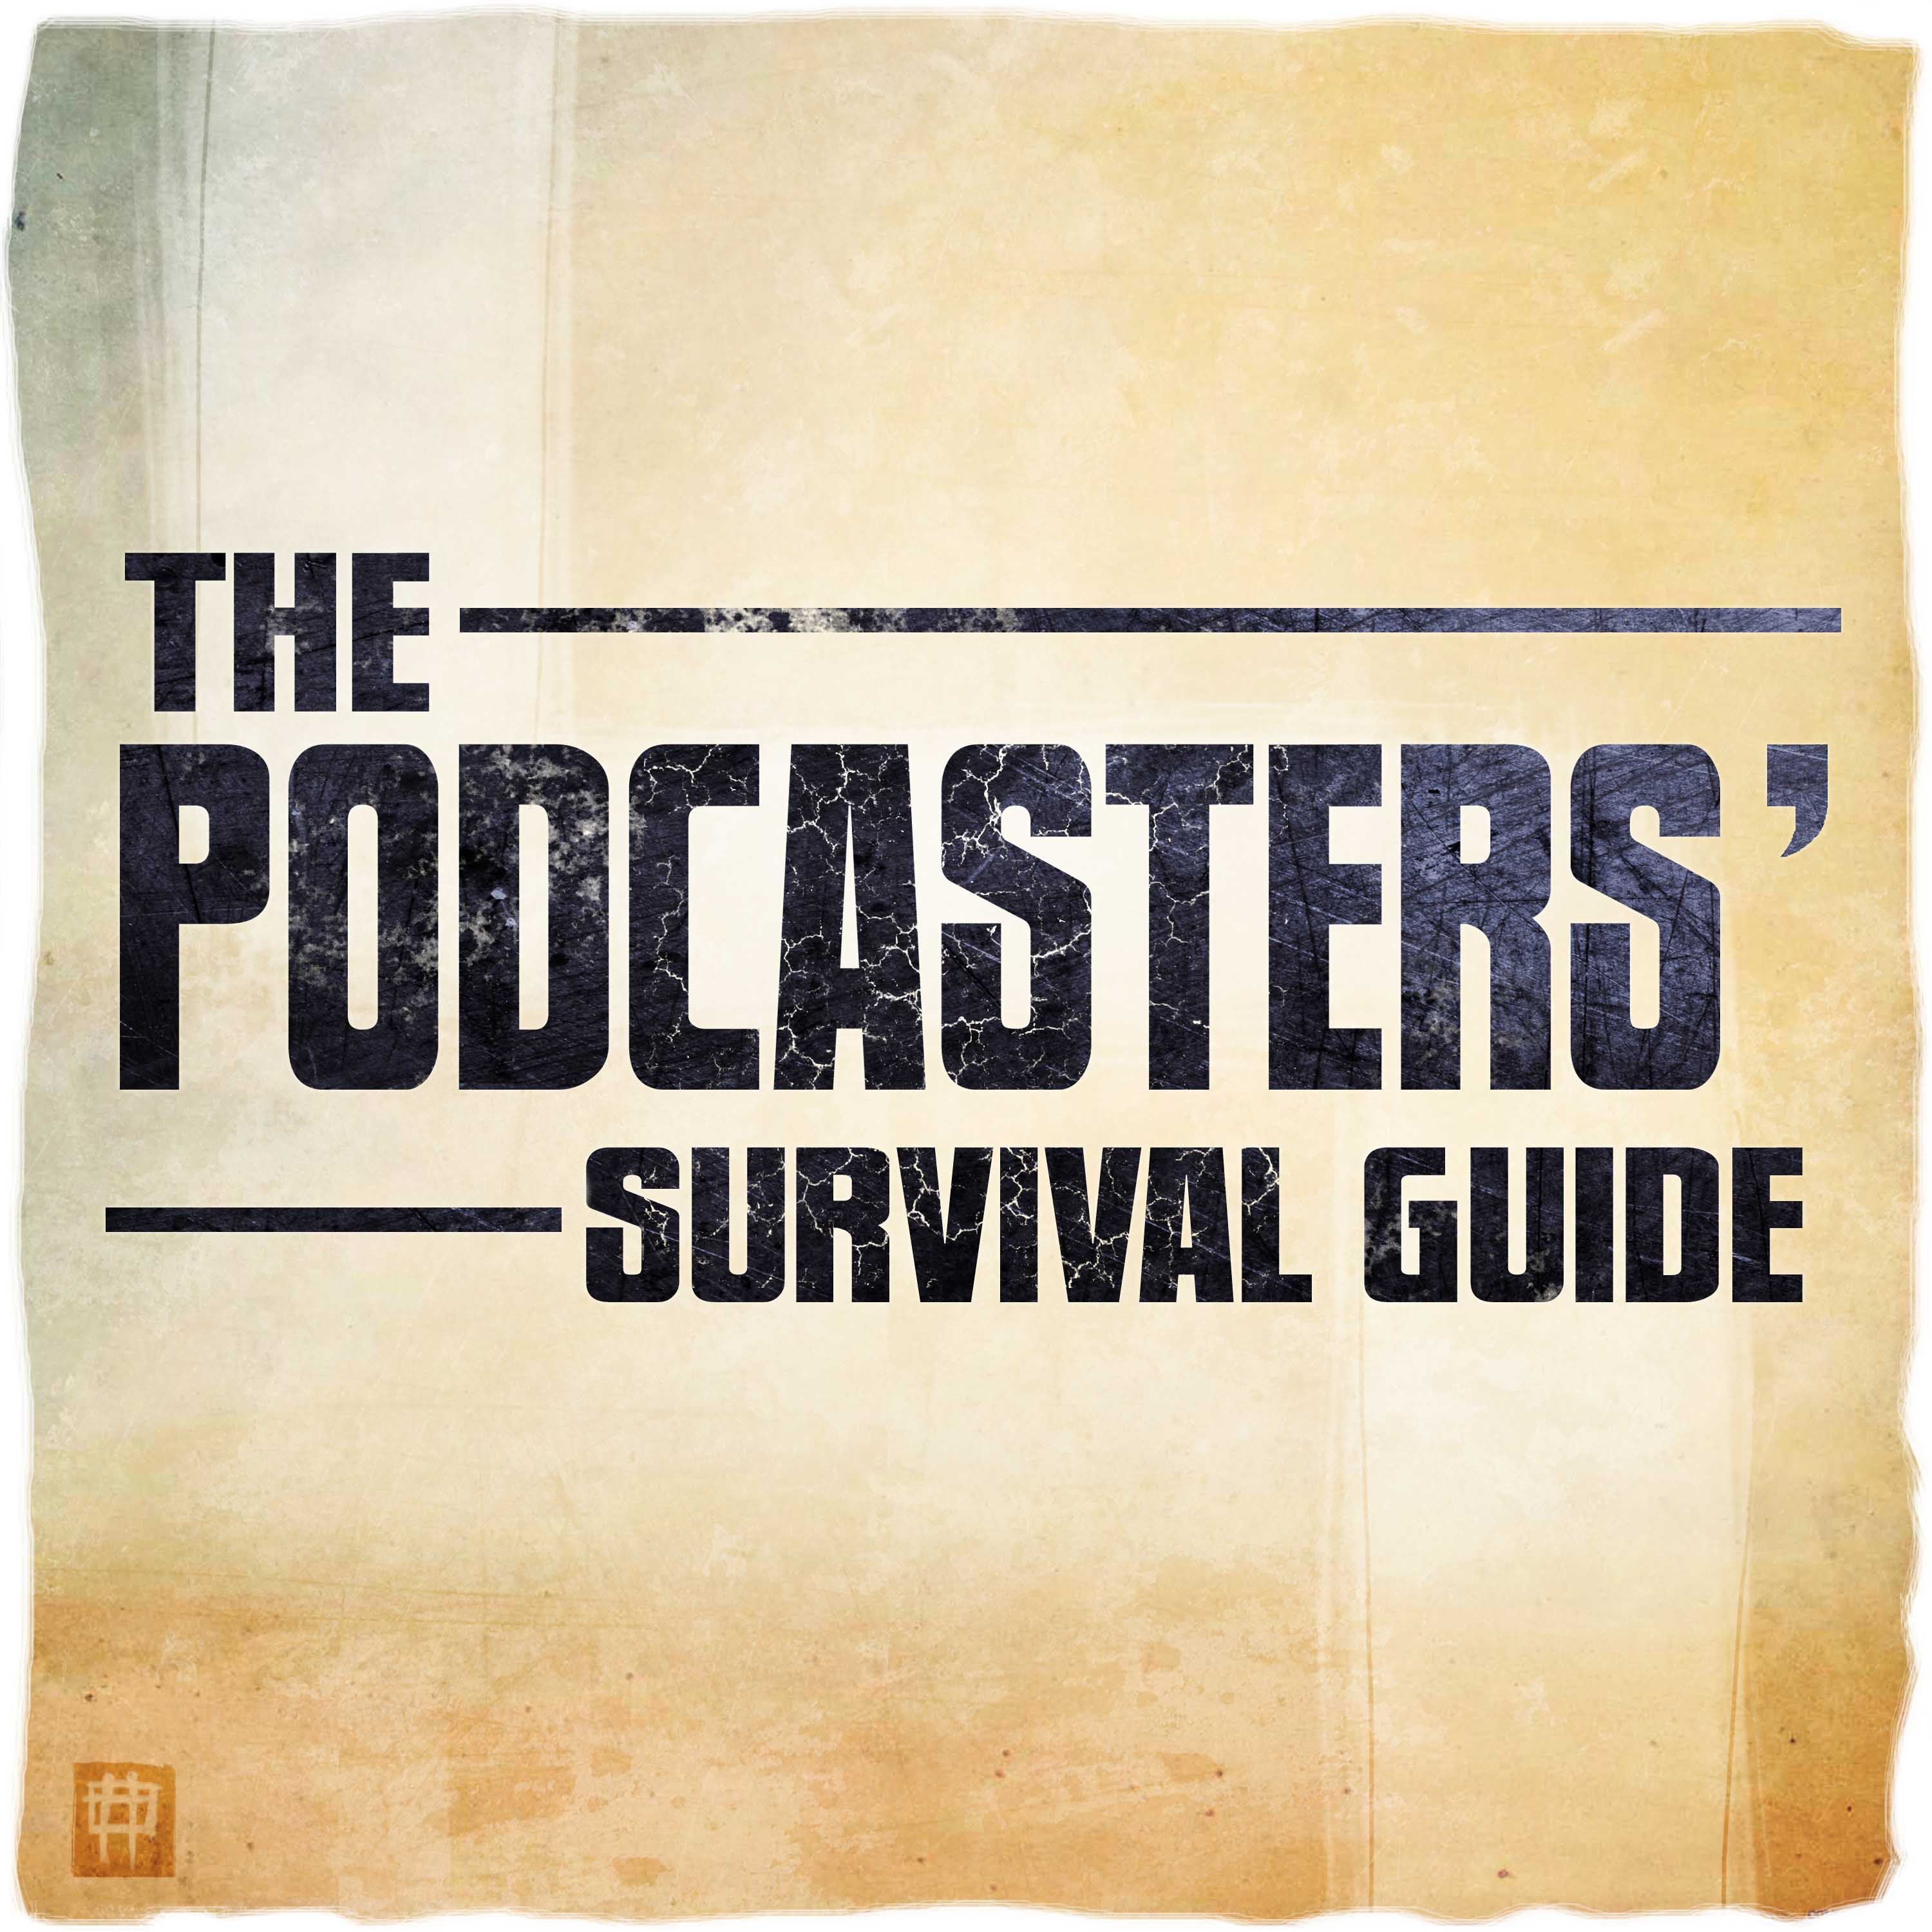 Show artwork for The Podcasters' Survival Guide